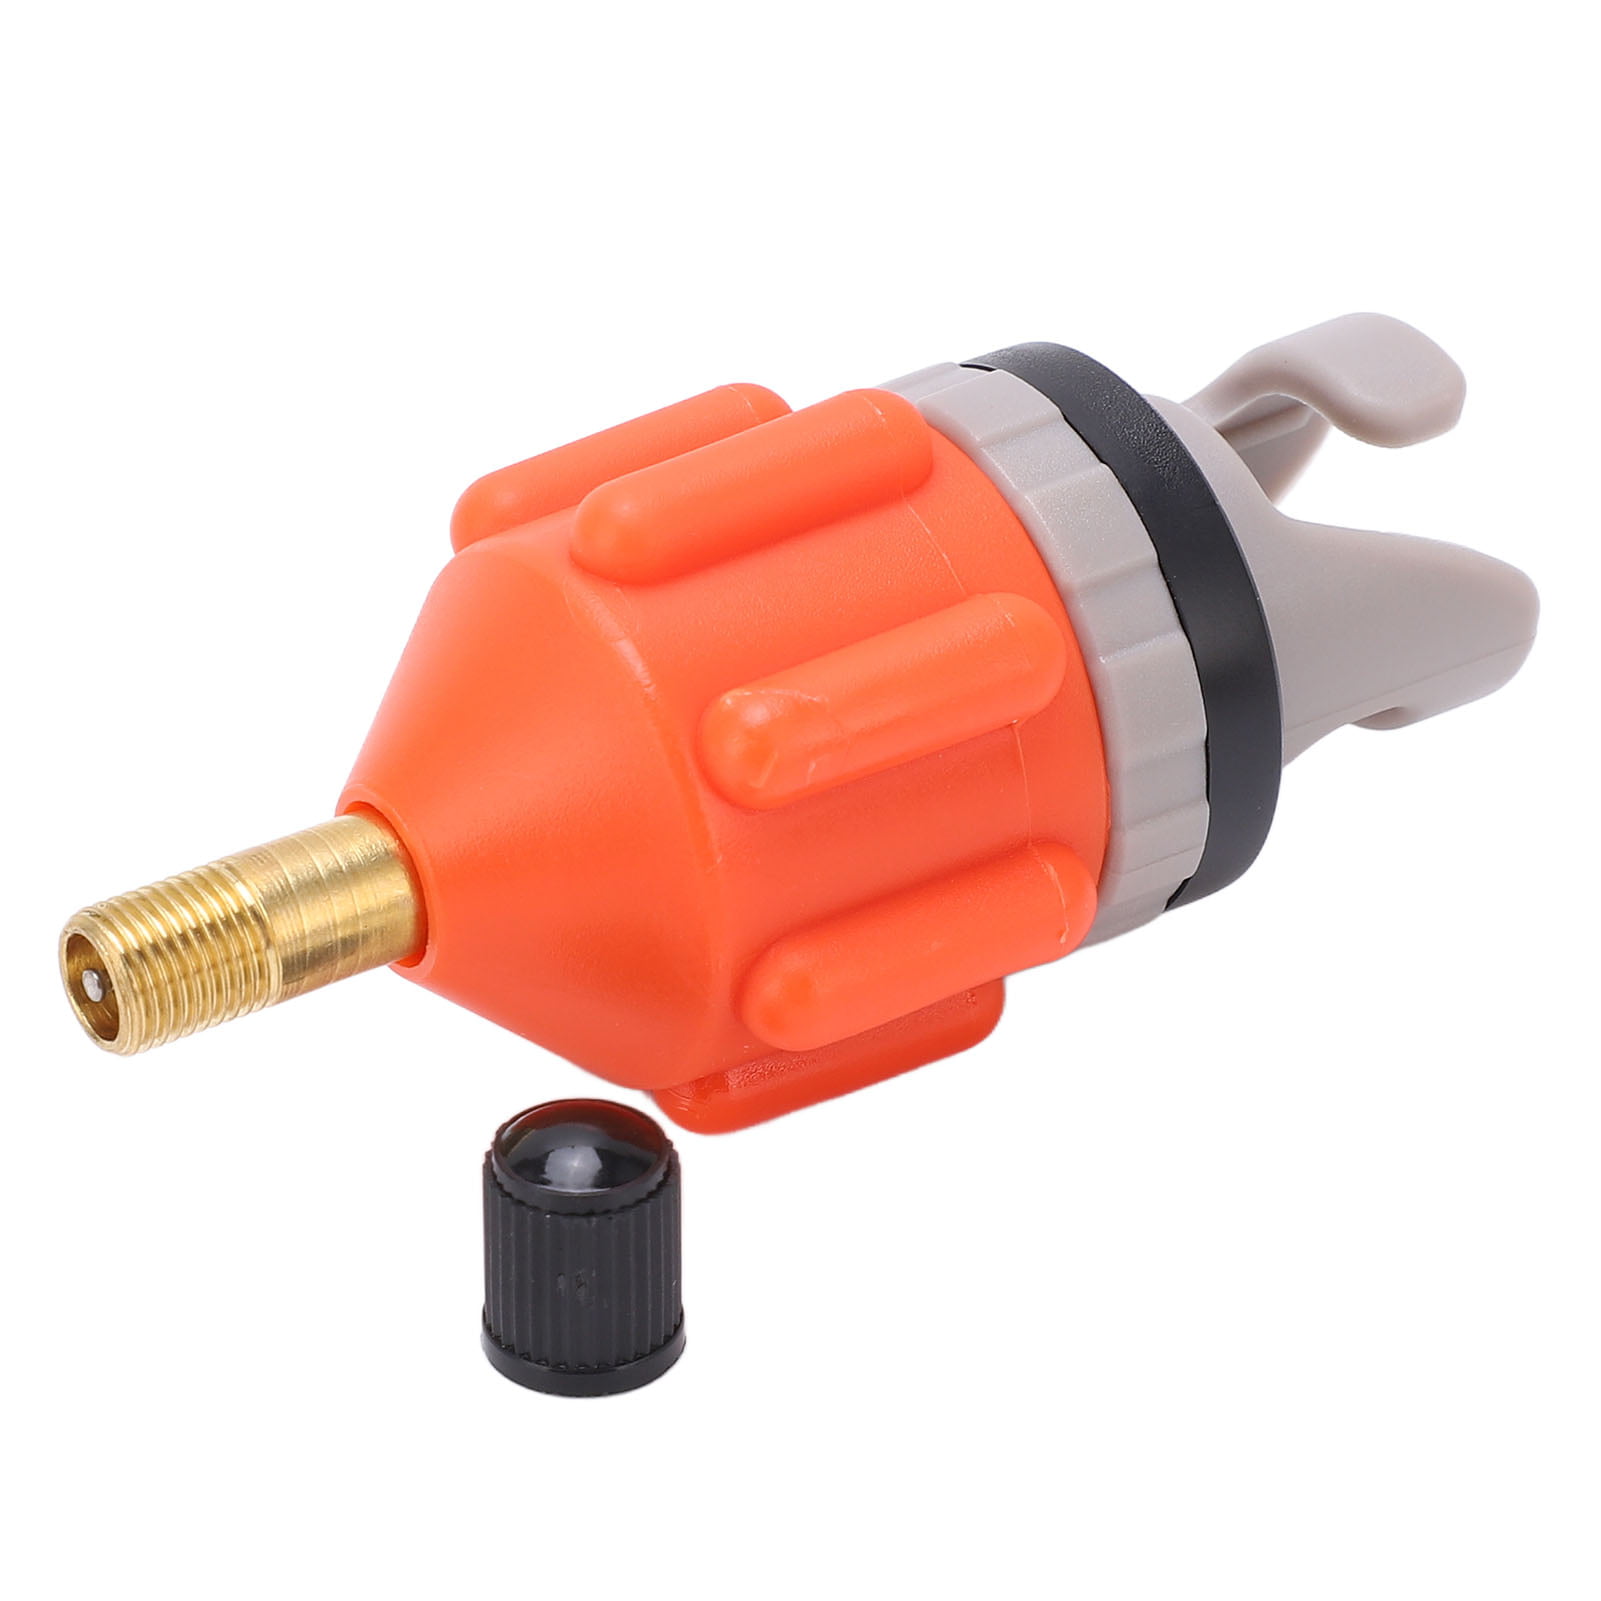 Paddle Board Pump Adapter High Pressure Resistant Easy to Inflate Leakproof Threaded Connection Portable for Paddle Boards Inflation Pump Adapter 